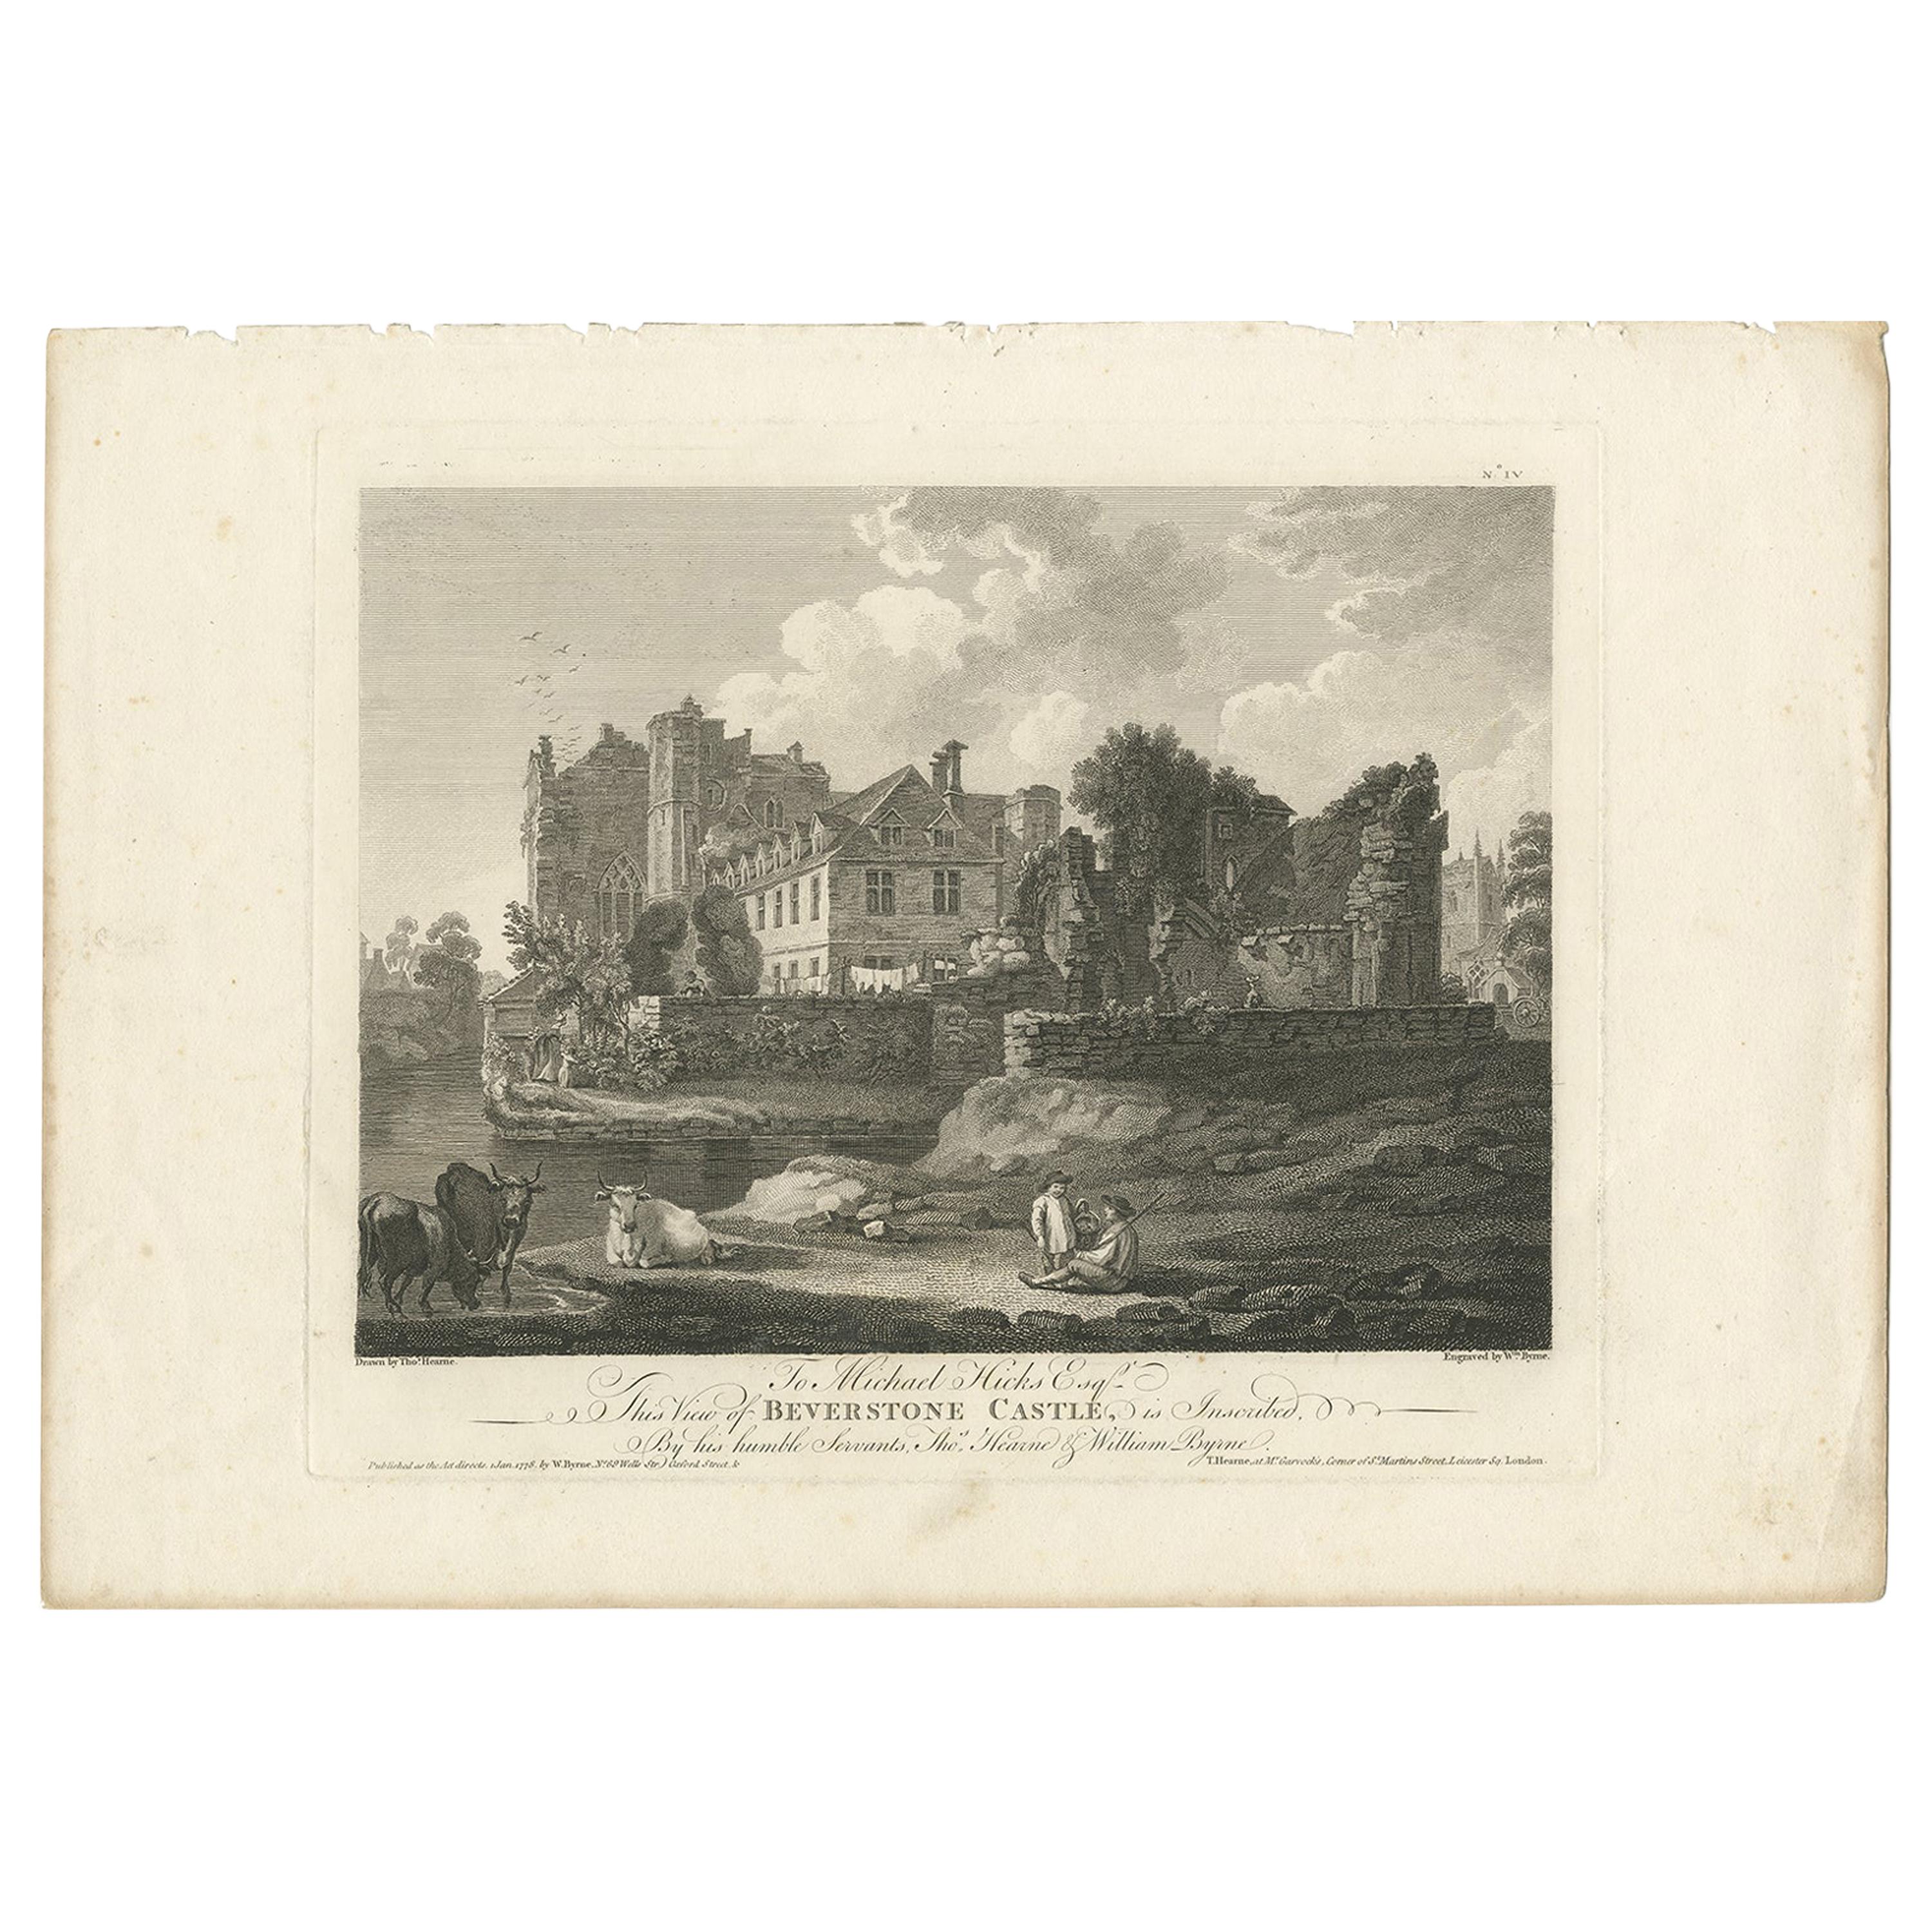 Antique Print of Beverston Castle by Byrne, '1778'